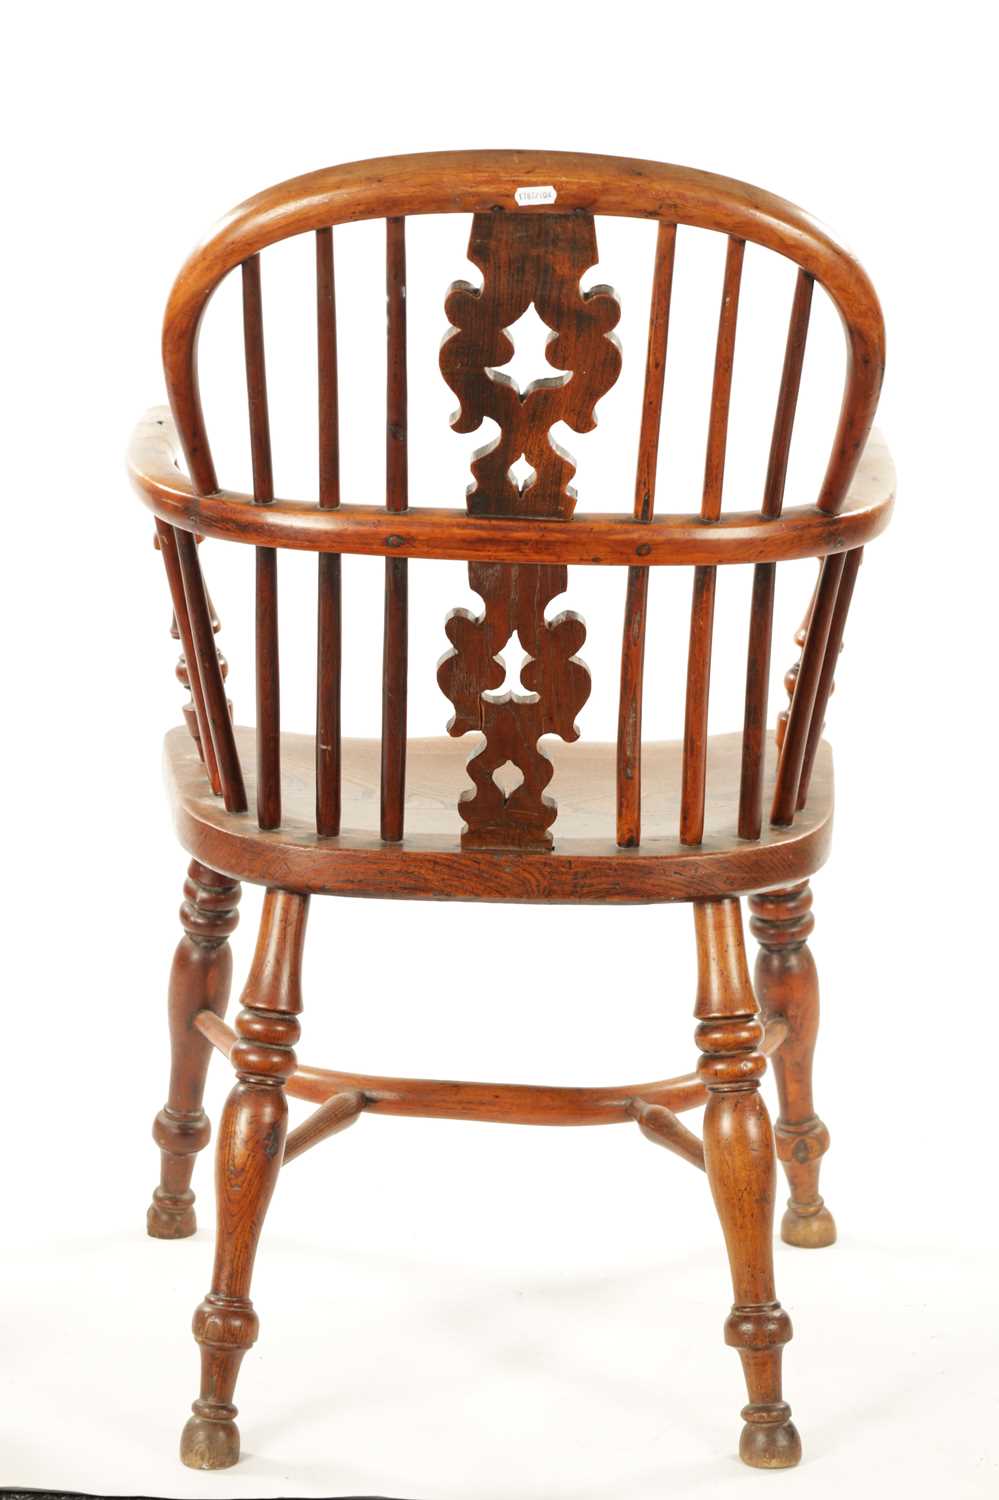 AN EARLY 19TH CENTURY NOTTINGHAMSHIRE YEW-WOOD LOW BACK WINDSOR CHAIR - Image 8 of 8